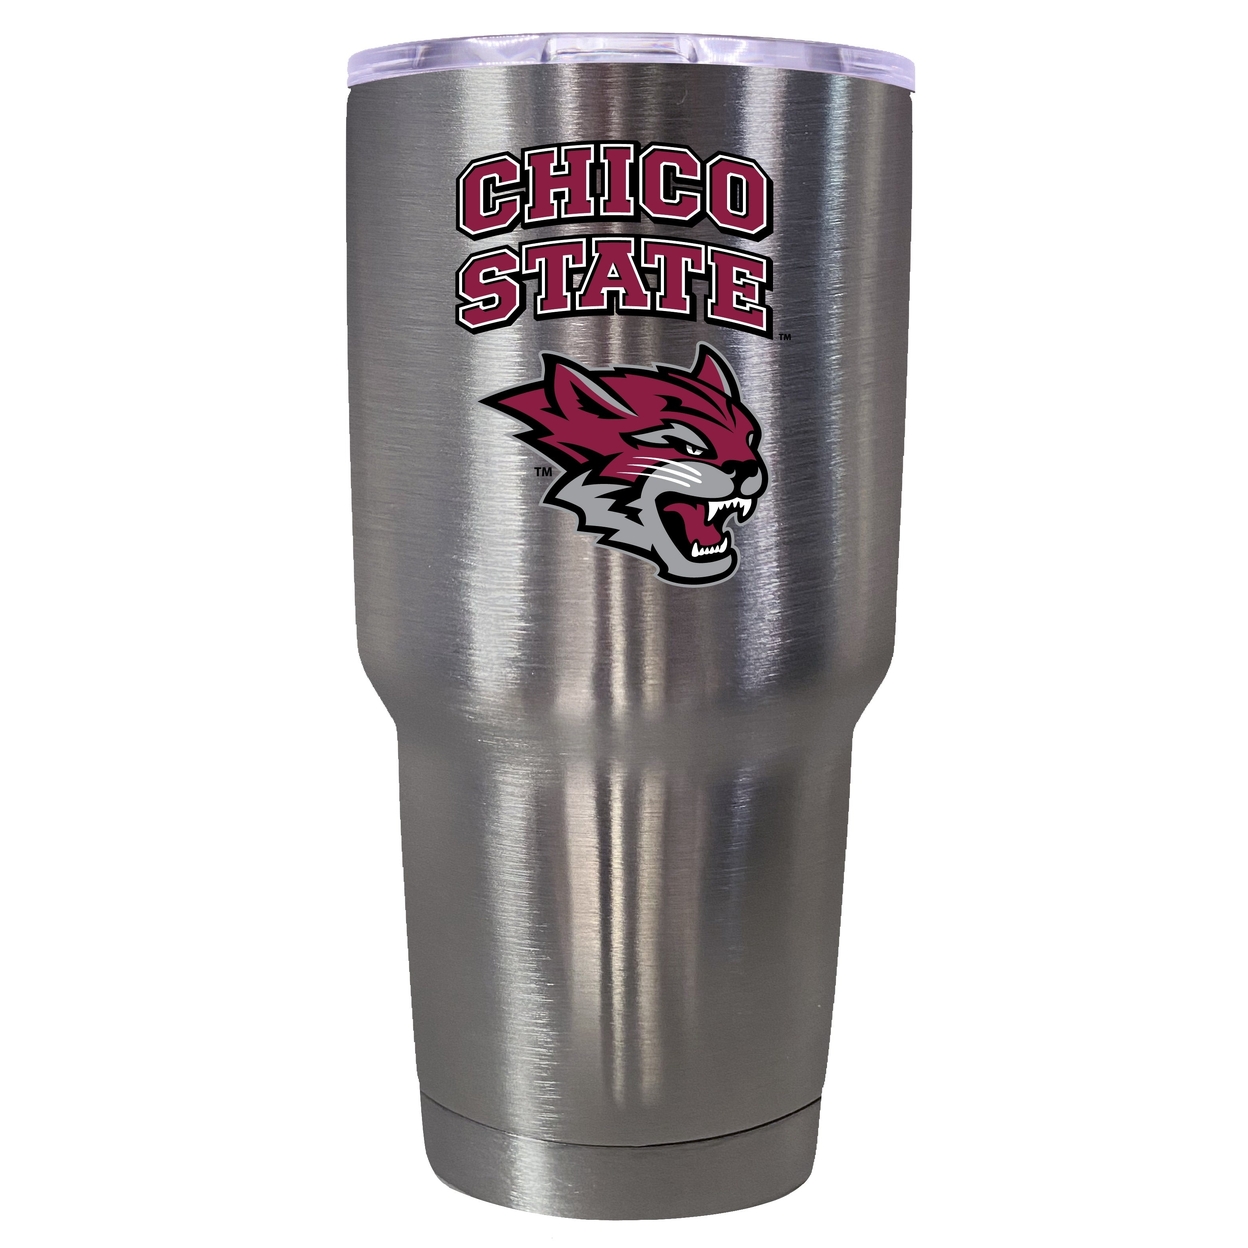 California State University, Chico 24 Oz Insulated Stainless Steel Tumbler